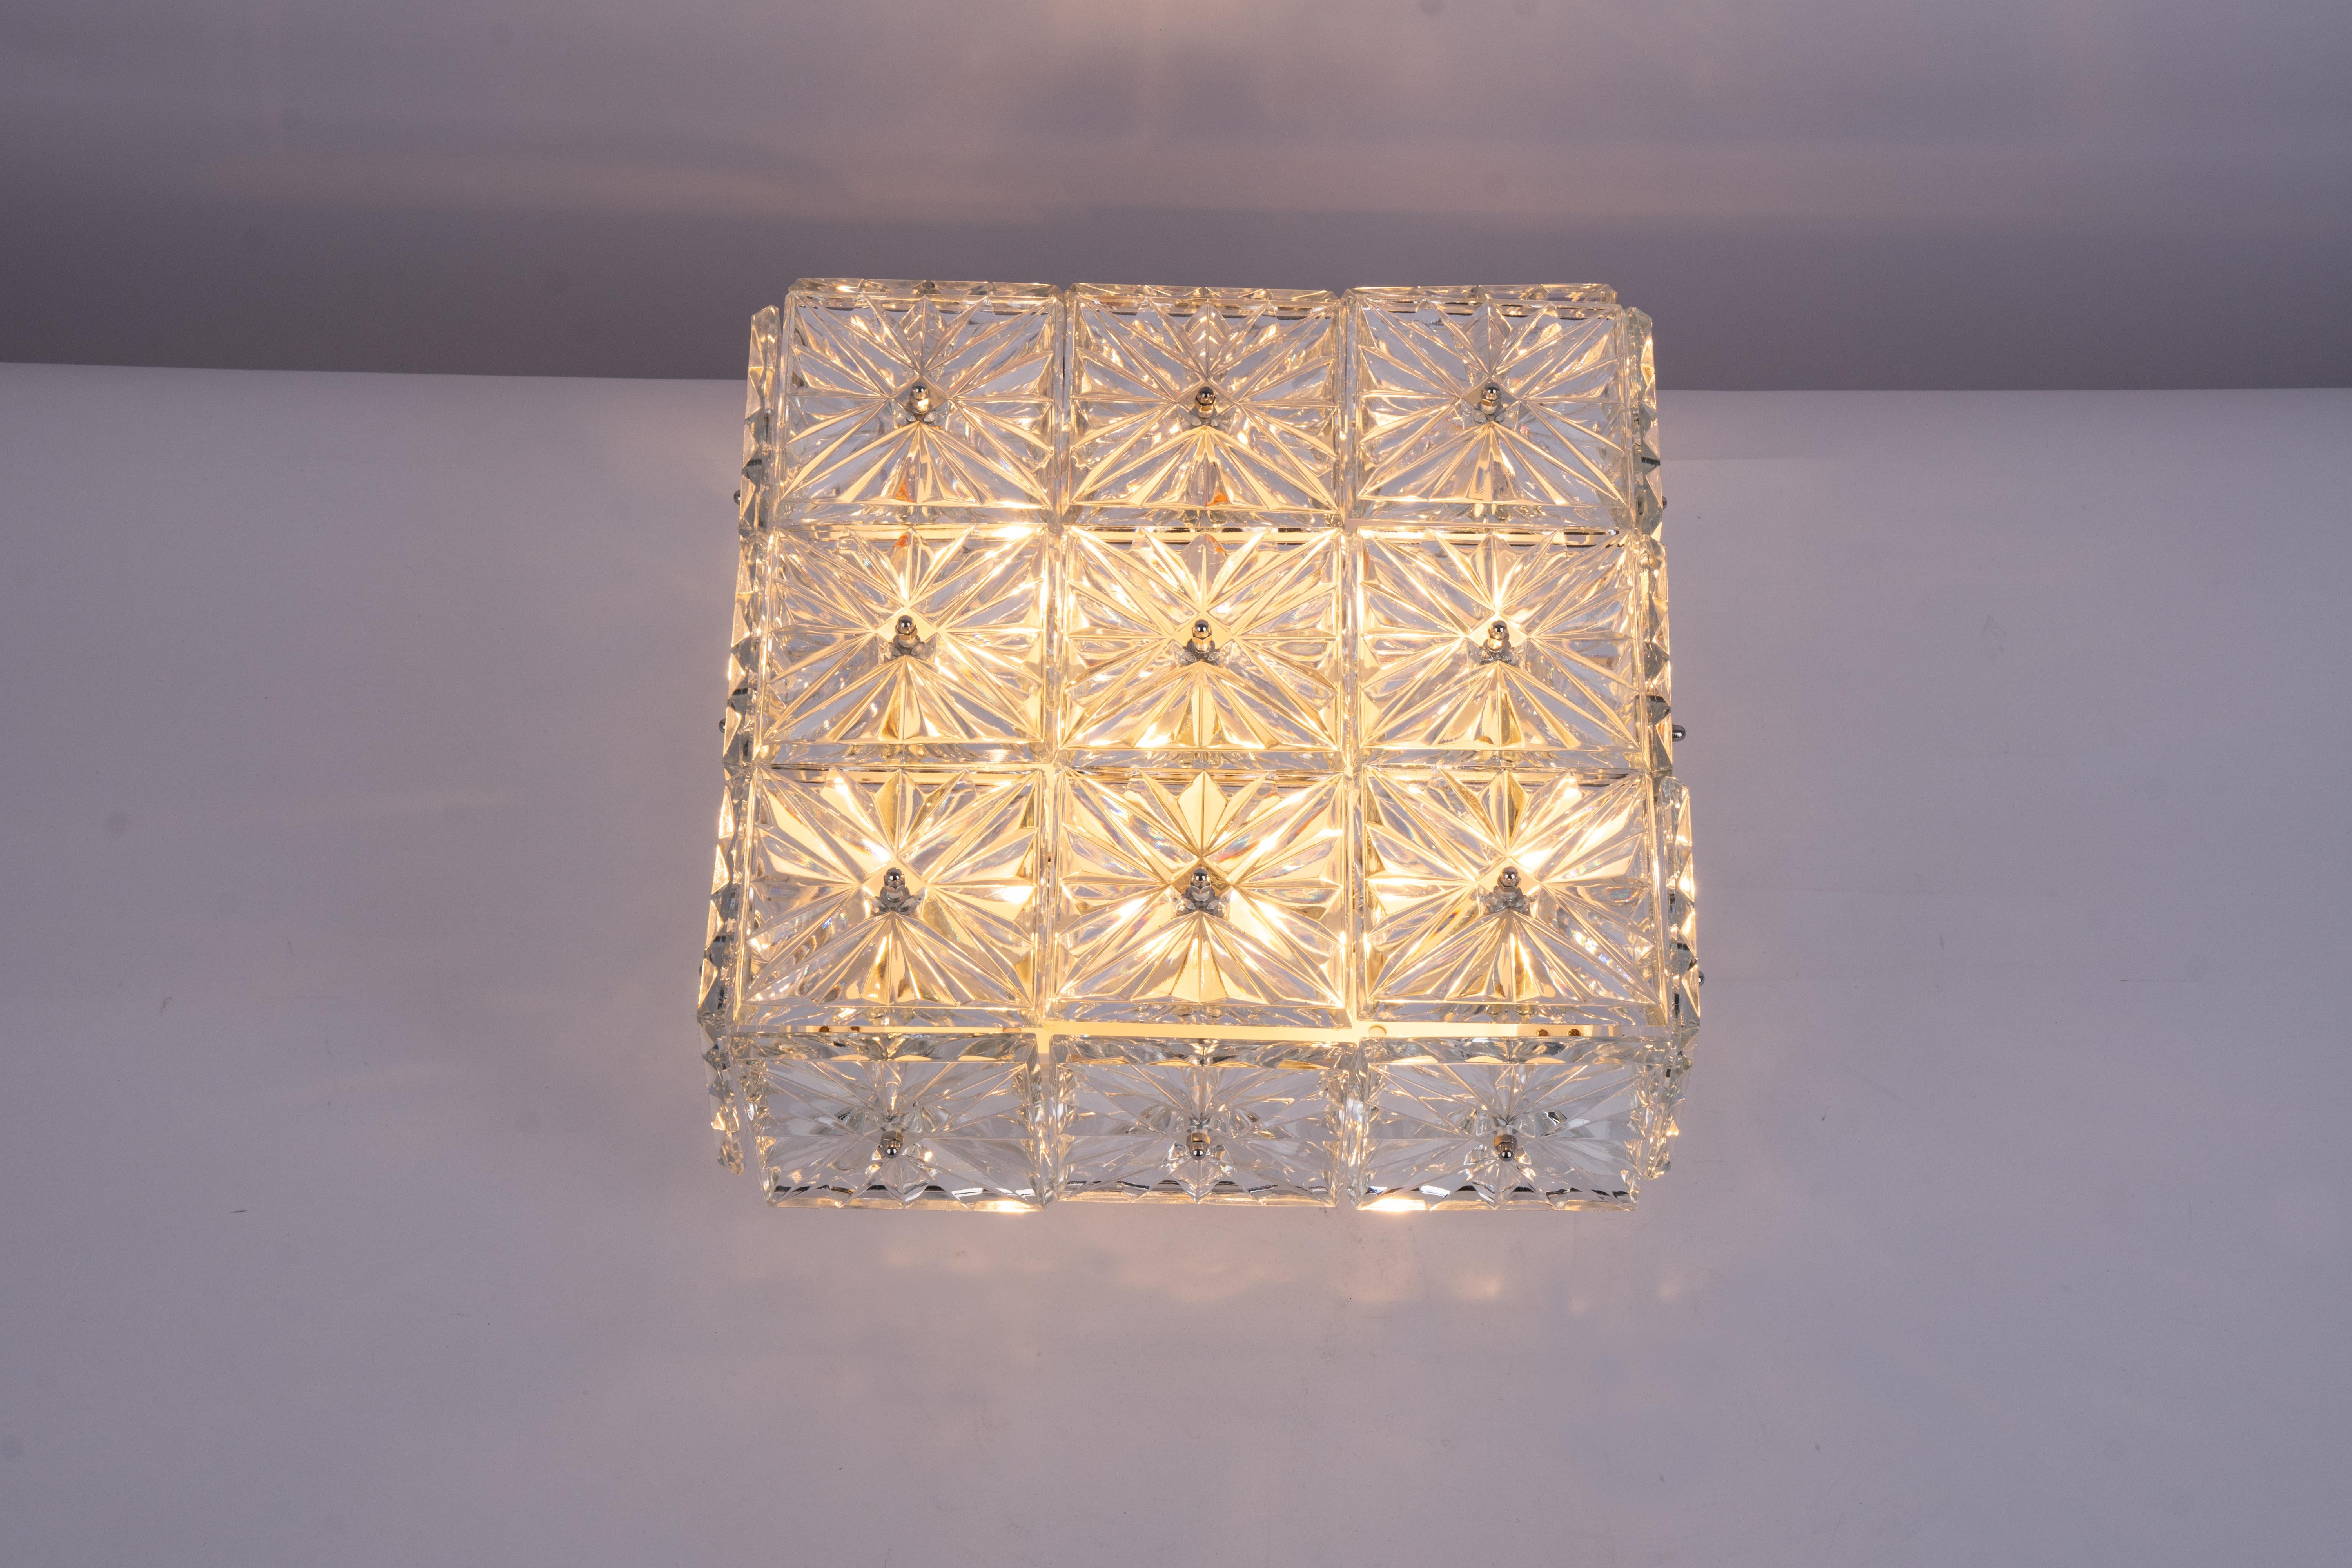 1 of 4 Large Flushmount Faceted Crystal Light Fixture, Germany, 1960s For Sale 3